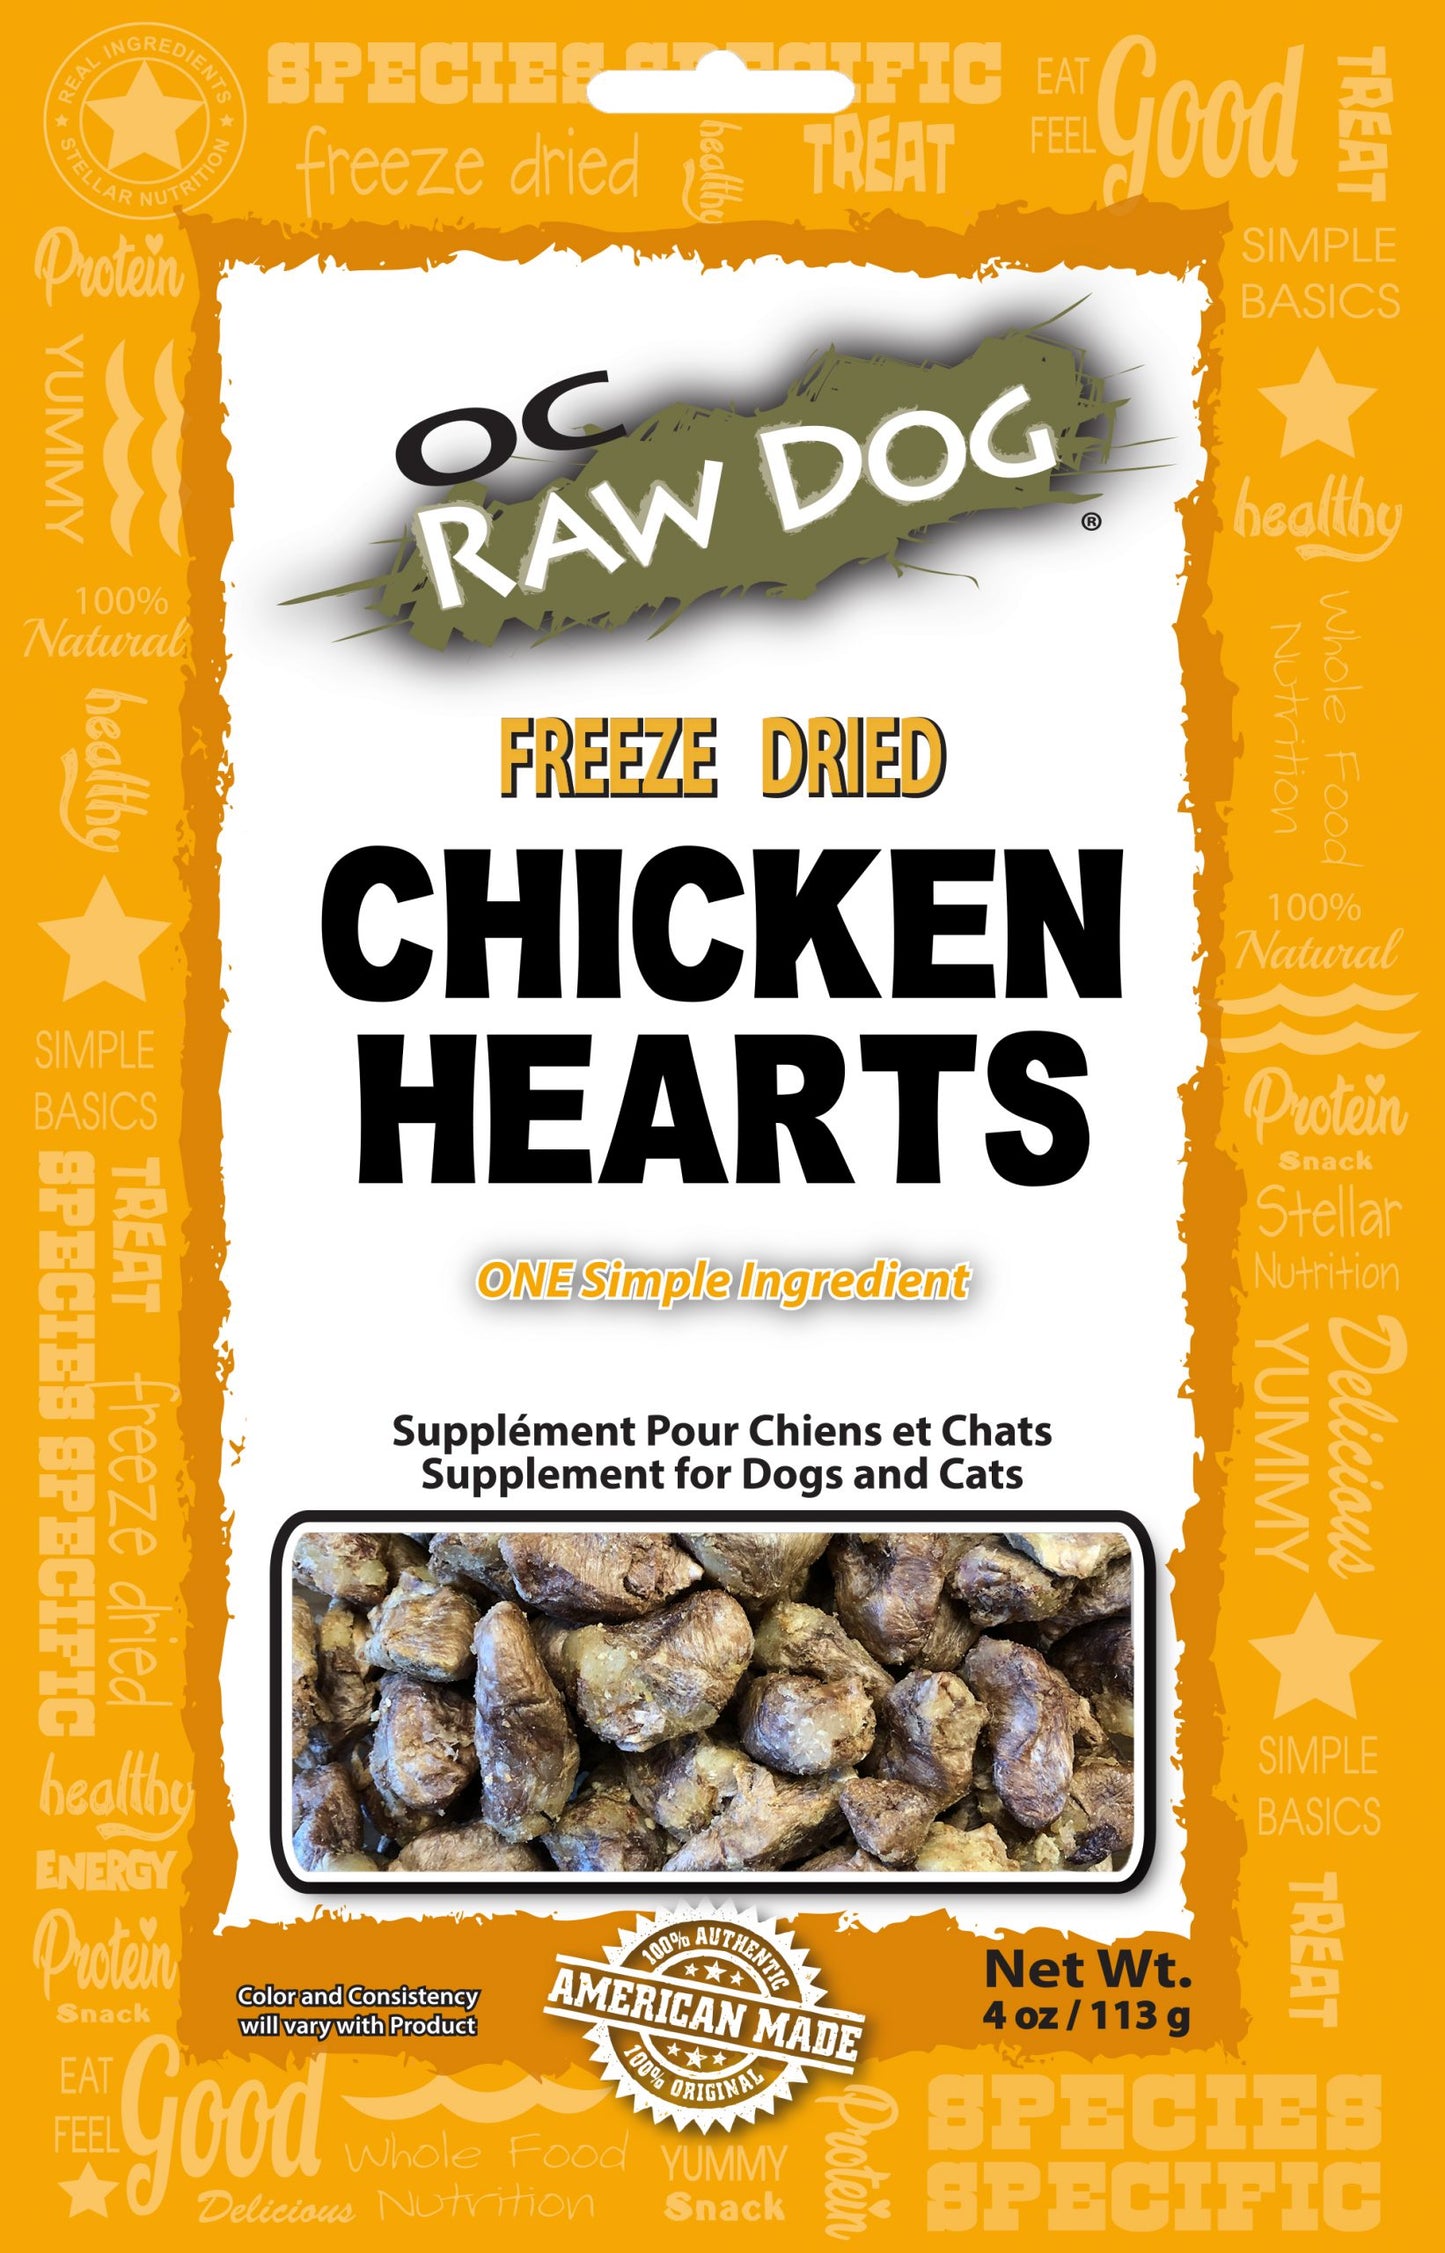 OC Raw Dog Freeze Dried Whole Chicken Heart Treat for Dogs